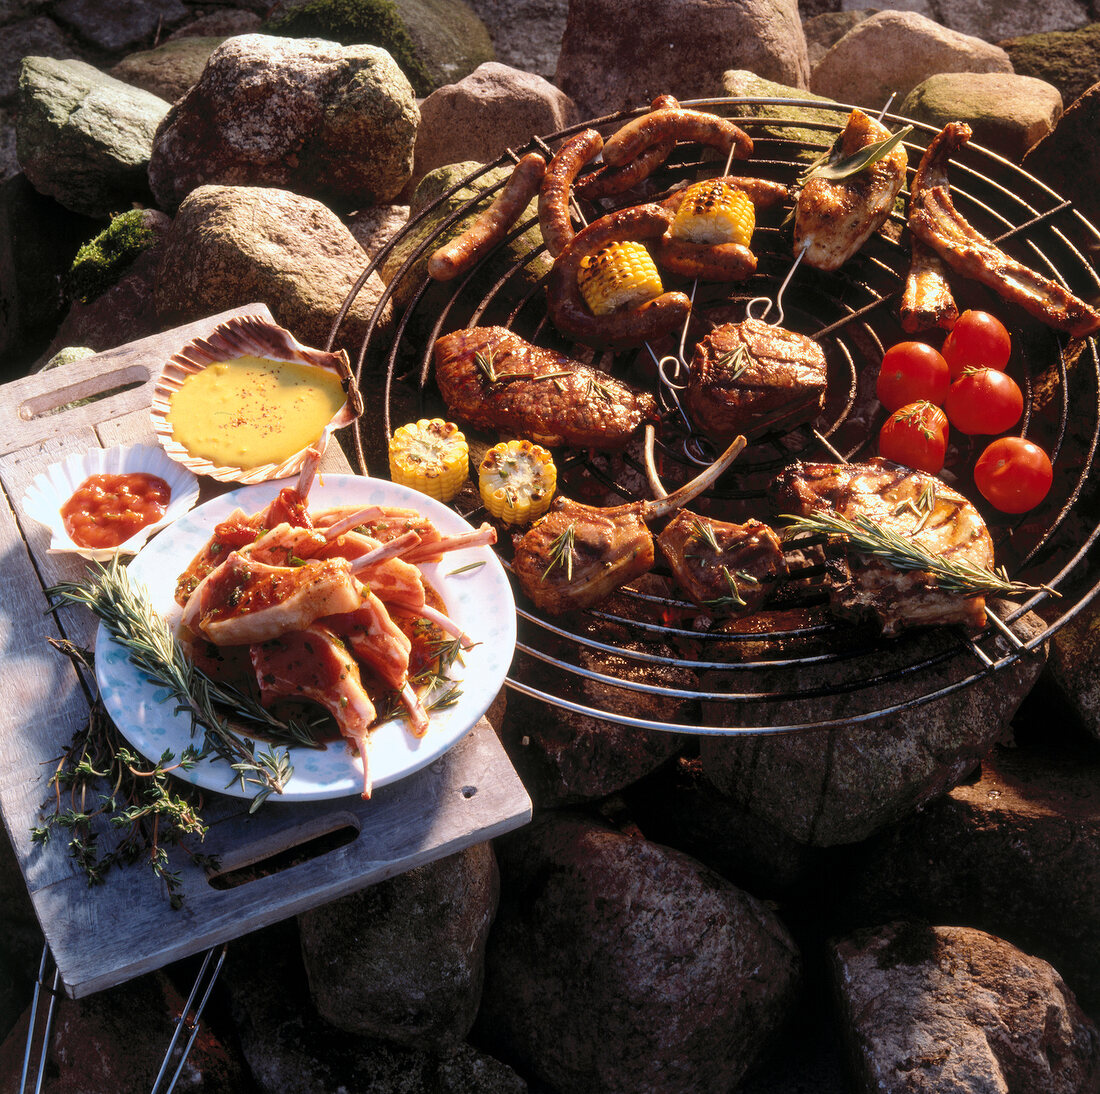 Sausages, tomatoes, corn, dips, rosemary and several kinds of meat served on a rock table